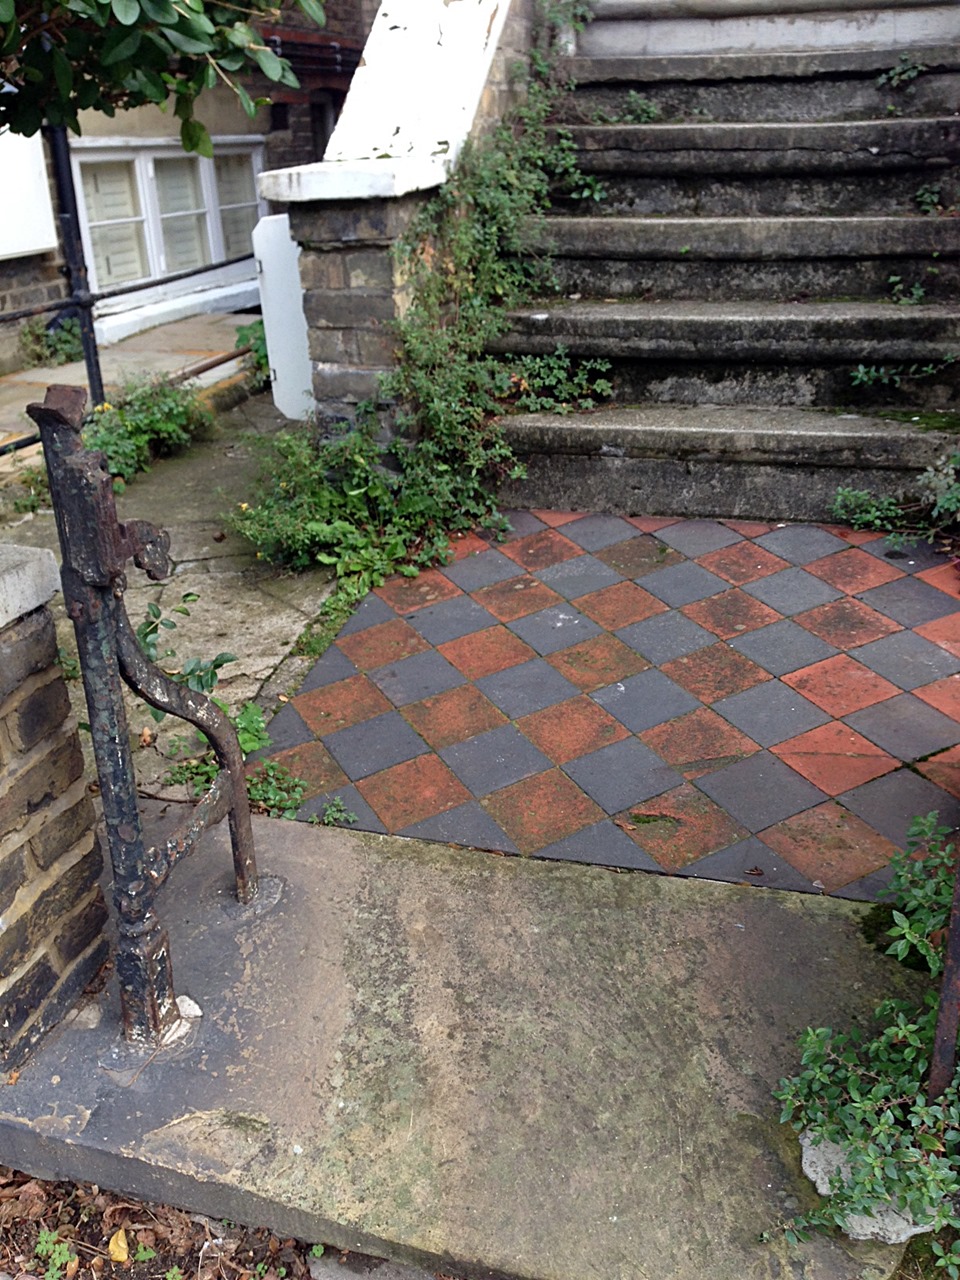 victorian original wrought iron roll back gate with old York stone quarry tile path and original London Stock brick wall Putney West Hill London# (3)